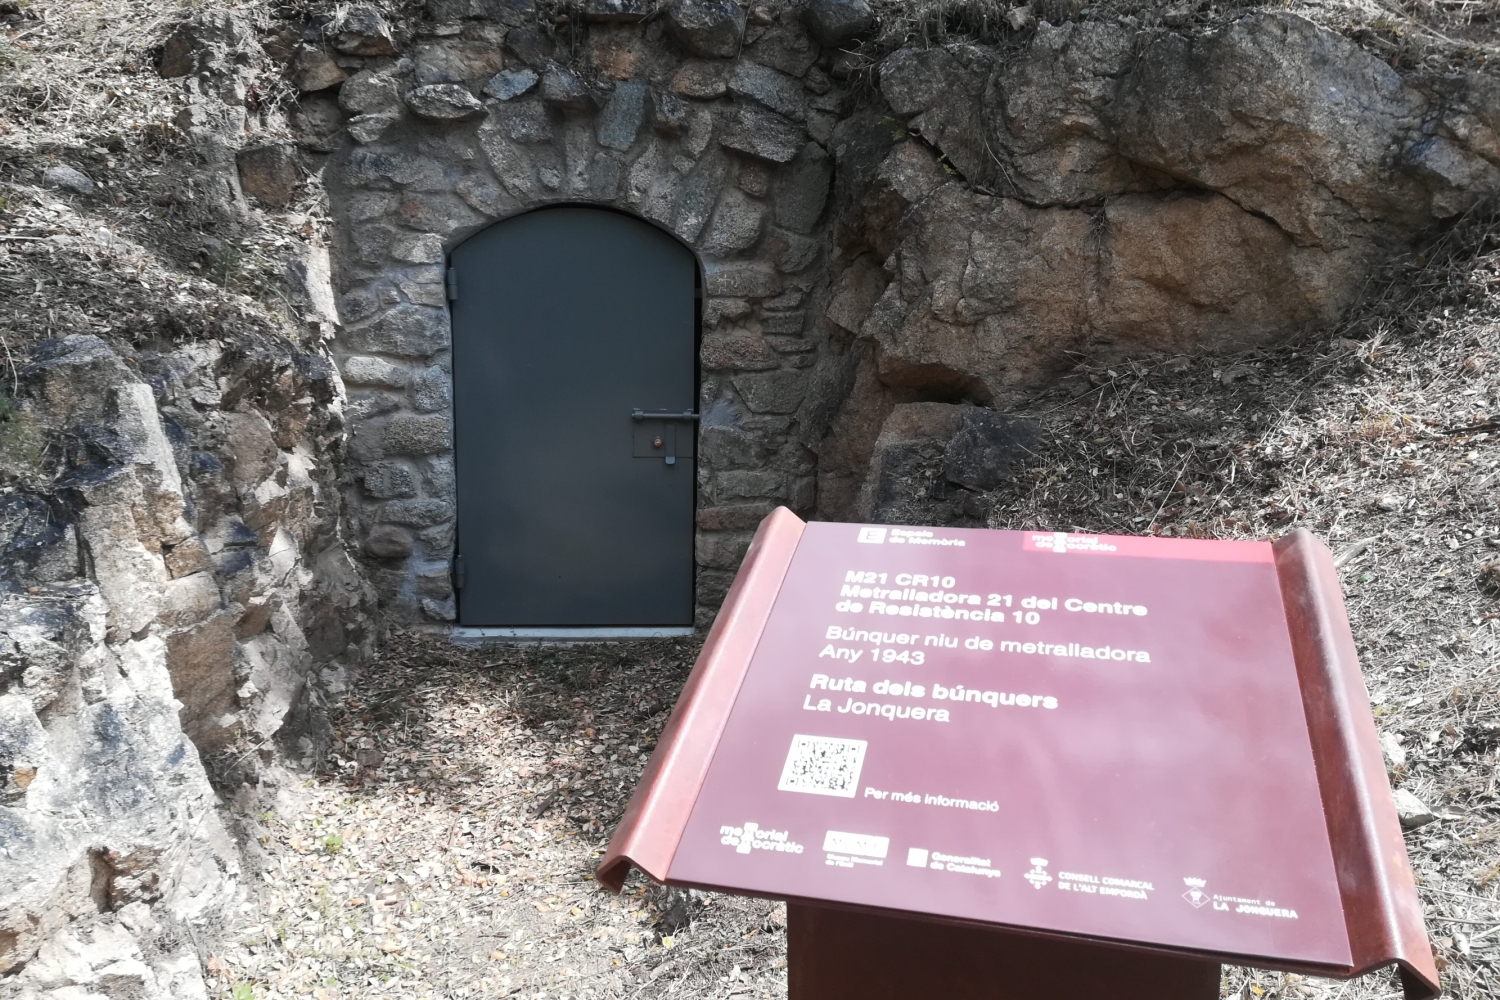 Open day and free guided tour of the MUME and the bunkers (Bunquer La Jonquera Copia)